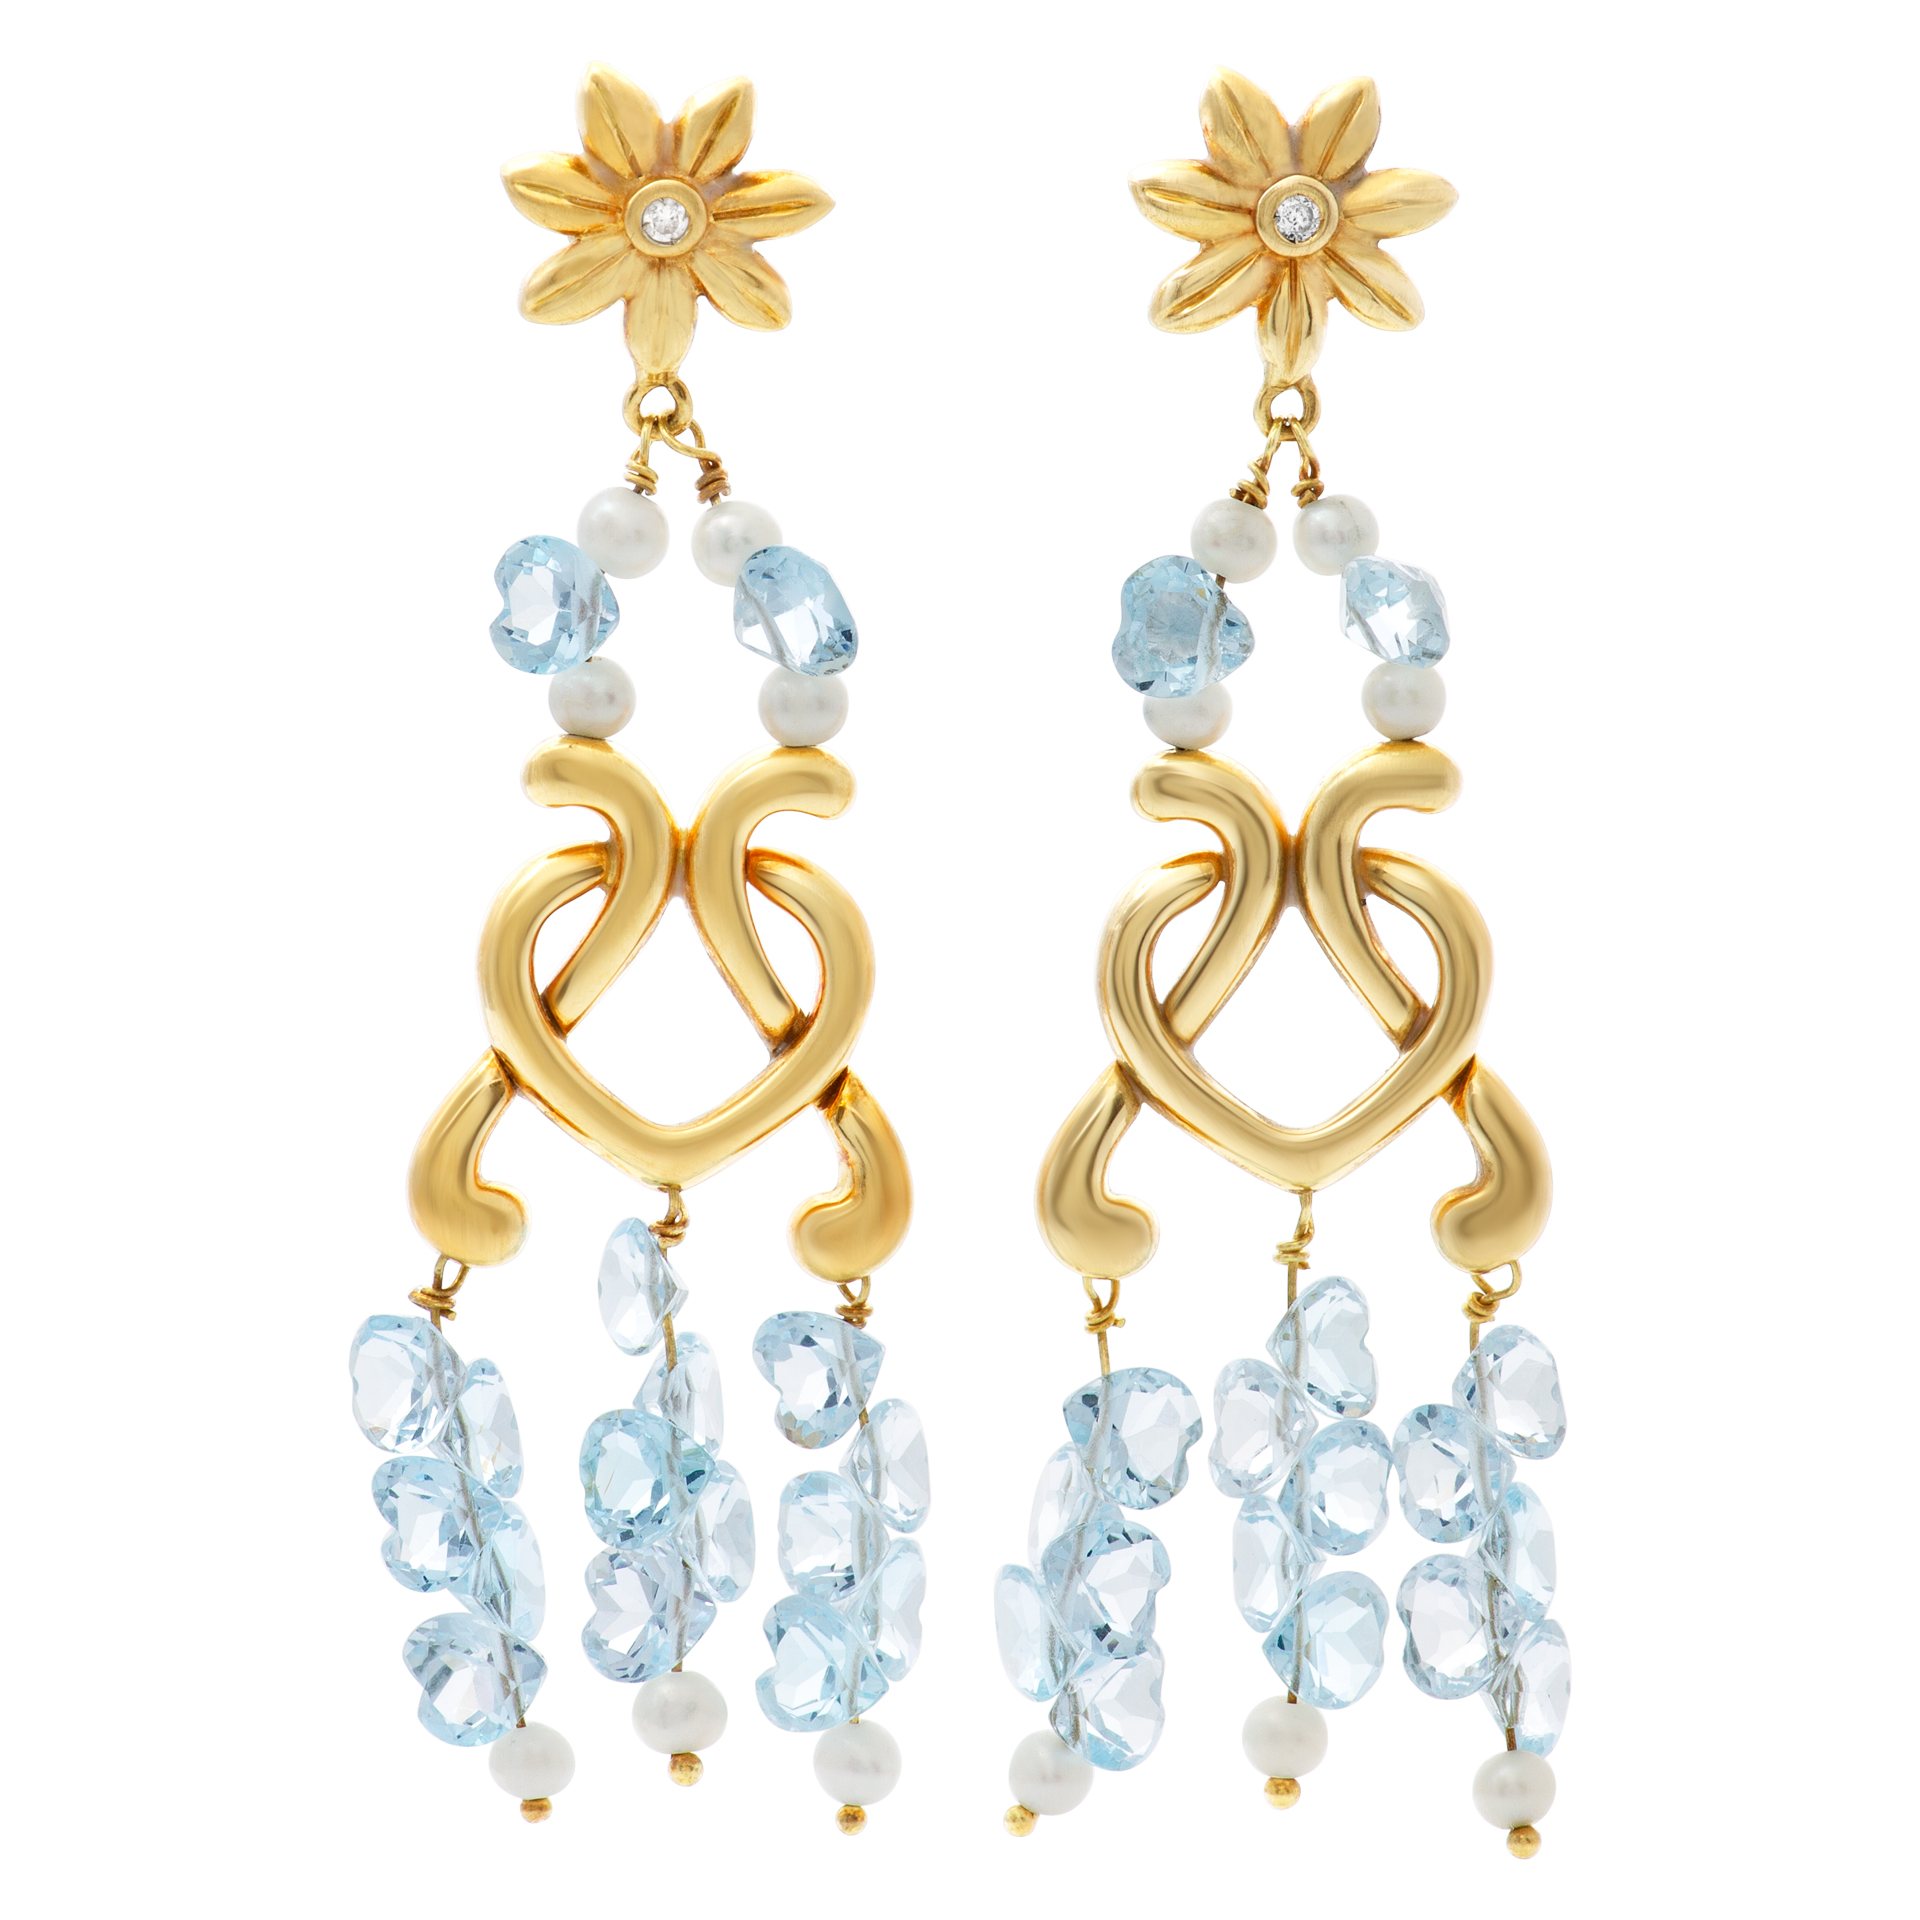 Dangling earrings with heart shape blue topaz, pearls and diamonds set in 18k yelow gold image 1